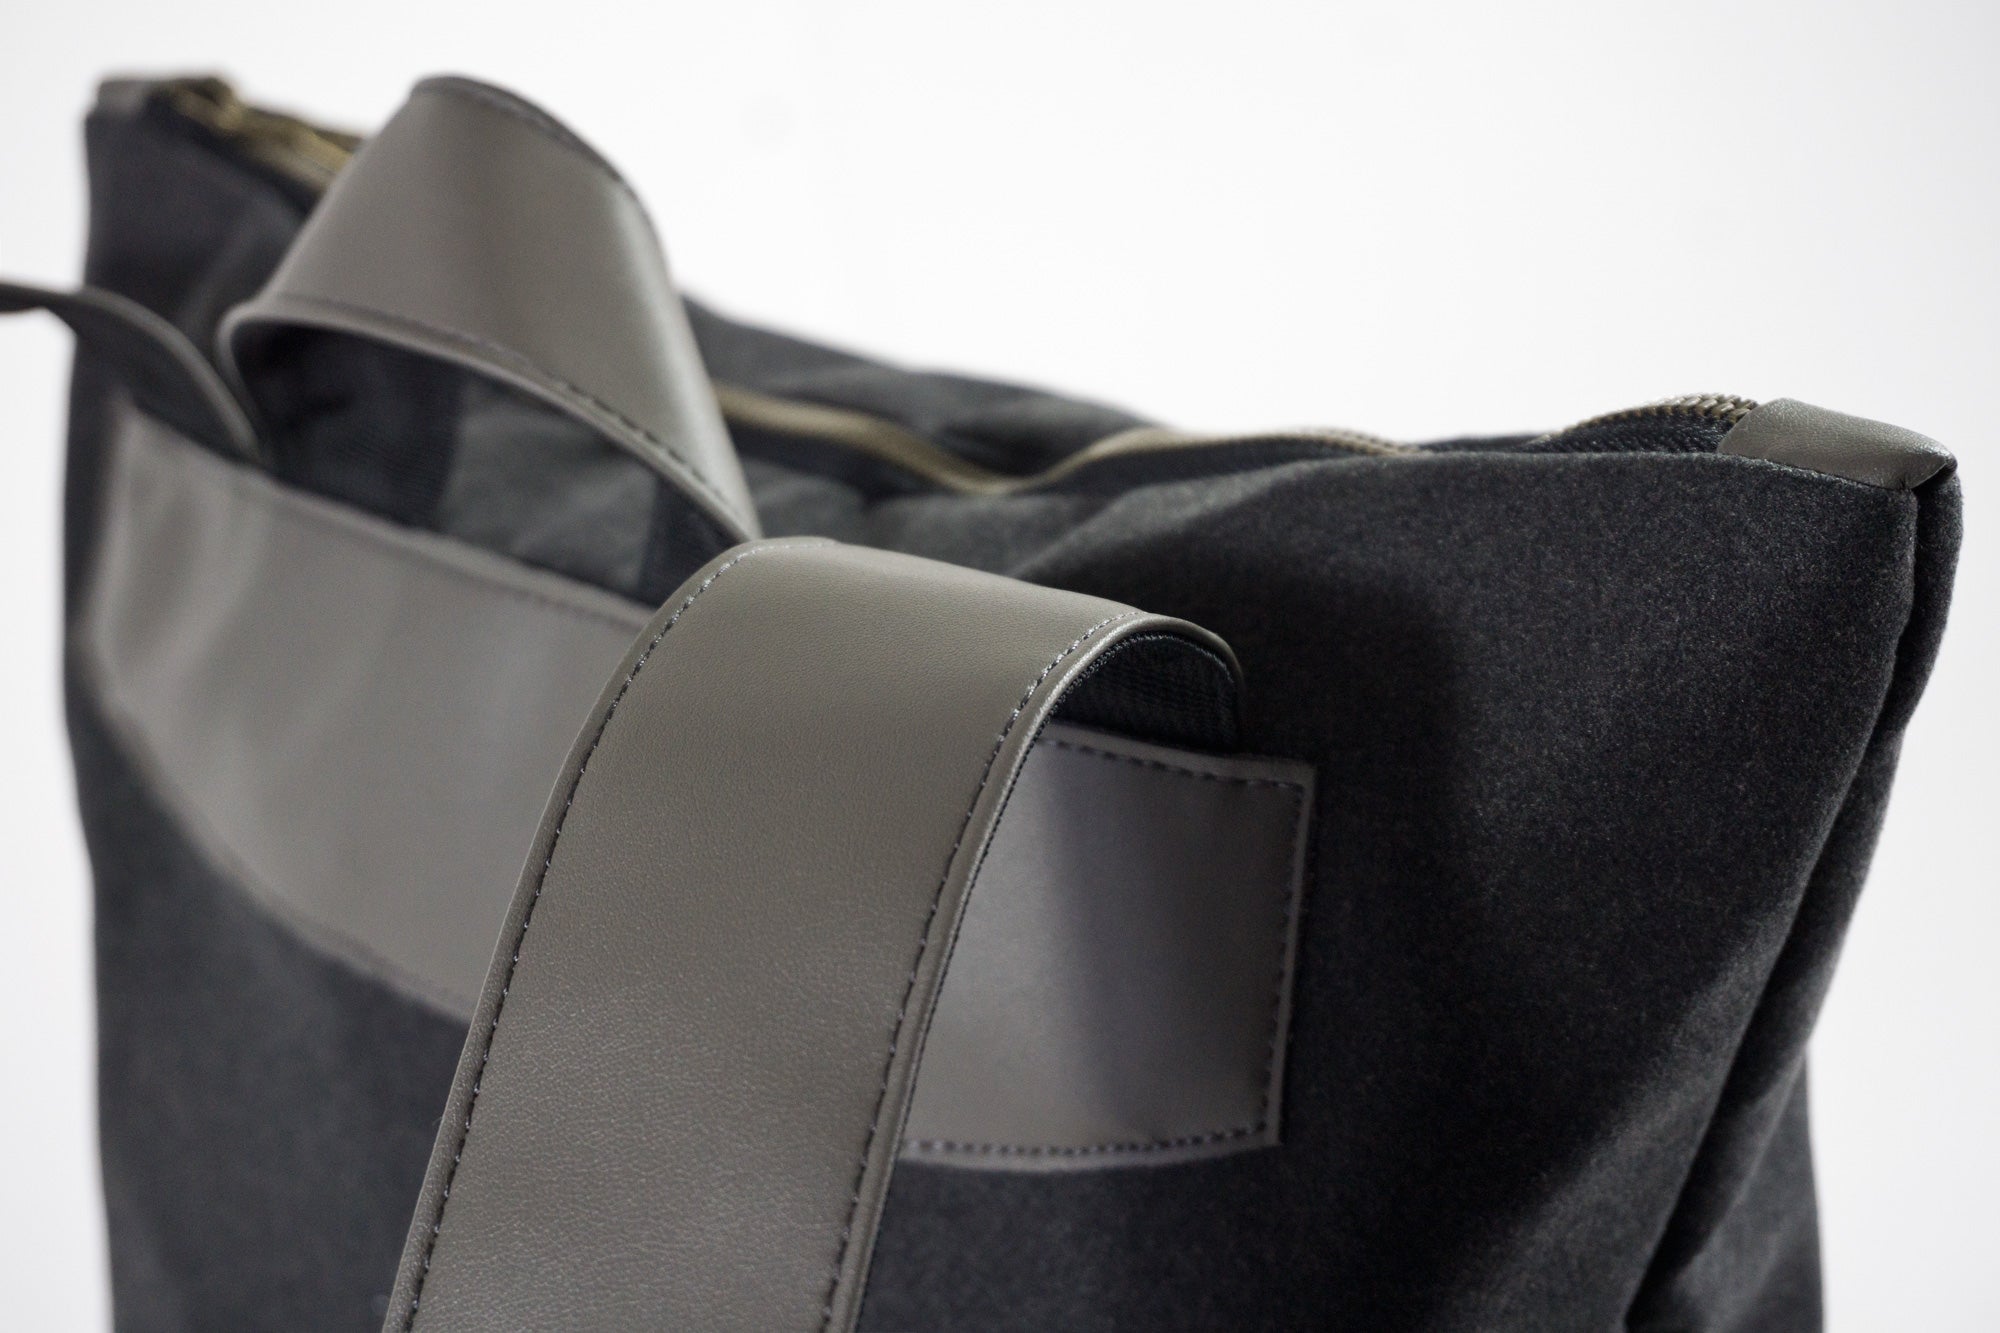 STERTHOUS - charcoal and sage green laptop backpack with vegan leather details